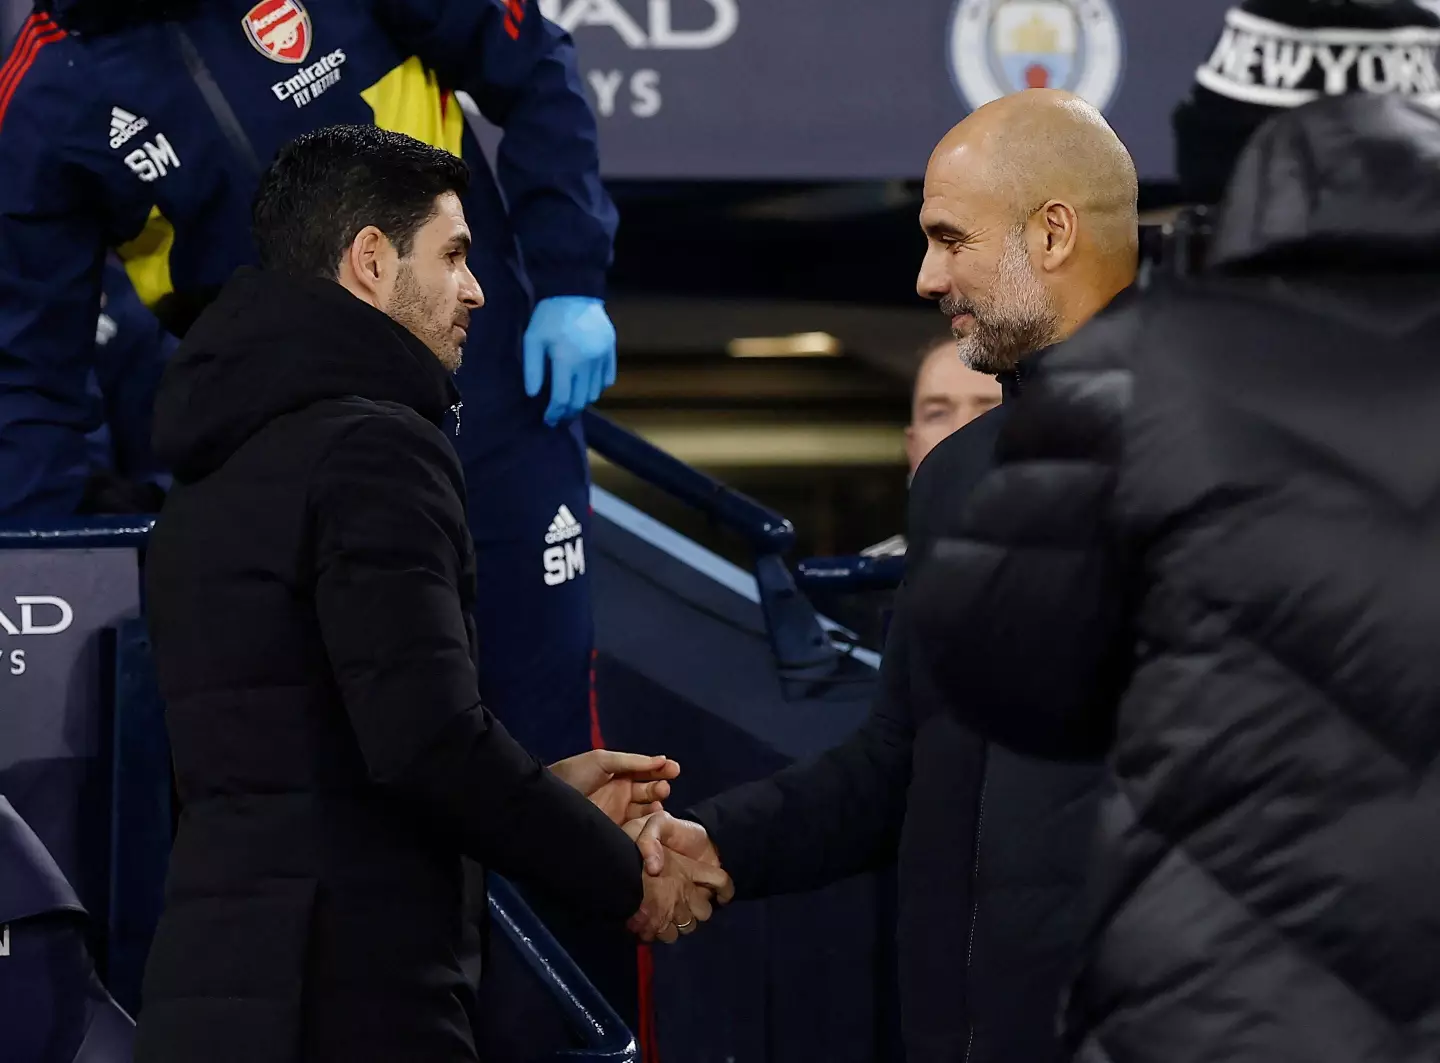 Pep Guardiola and Mikel Arteta embrace before their FA Cup tie. Image: Alamy 